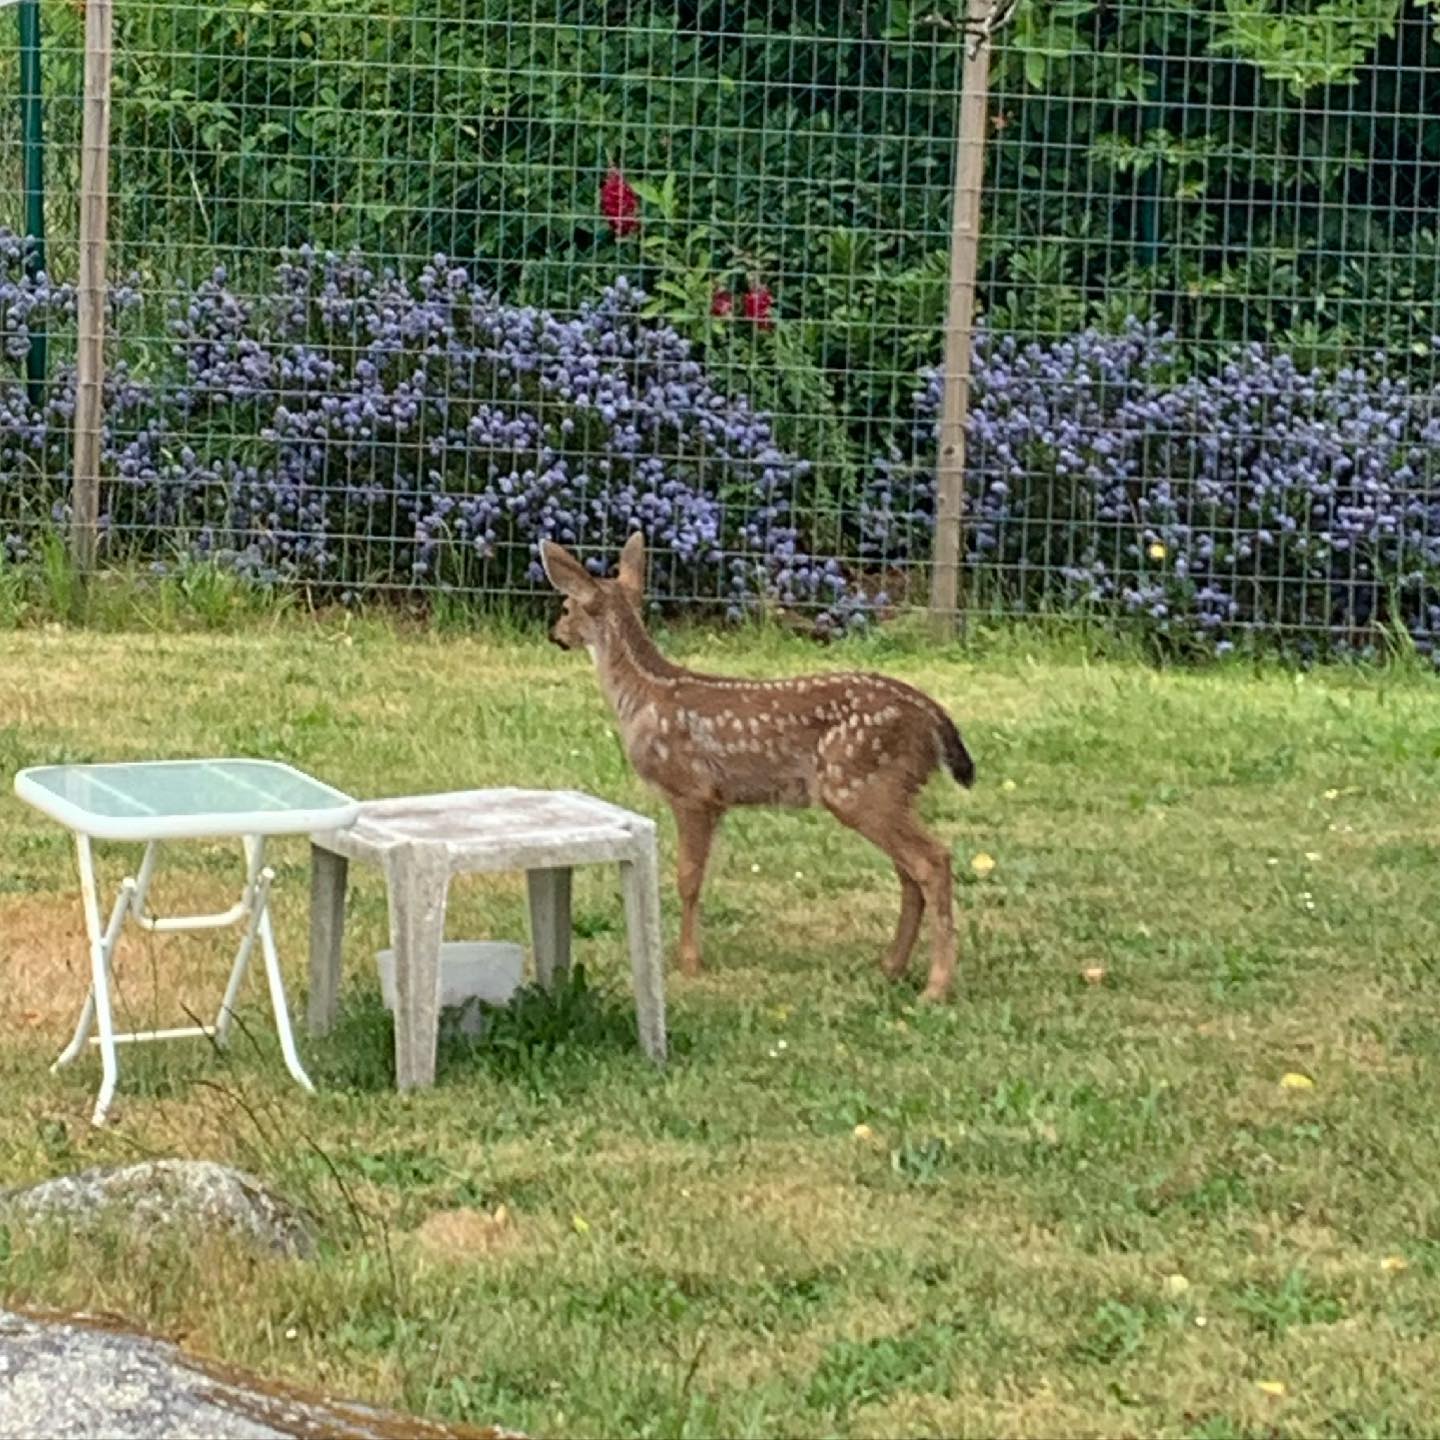 Well, it’s that time of year again. #esquimalt #deer #fawns